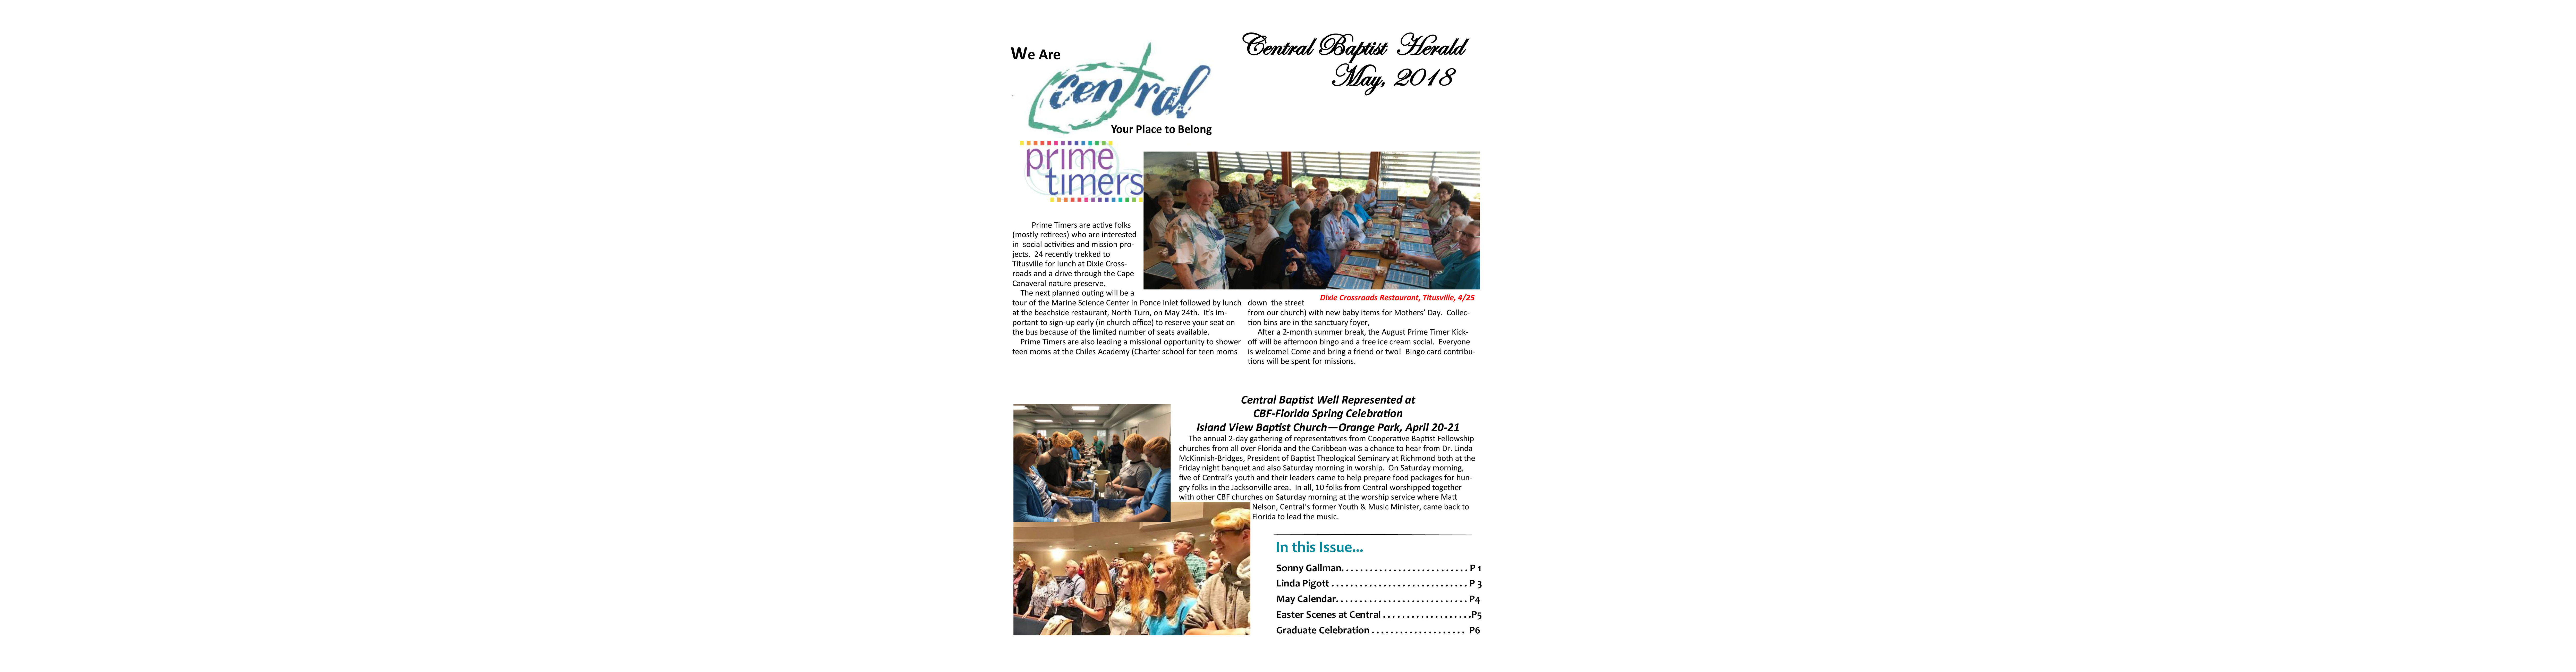 Central Herald Newsletter, May 2018